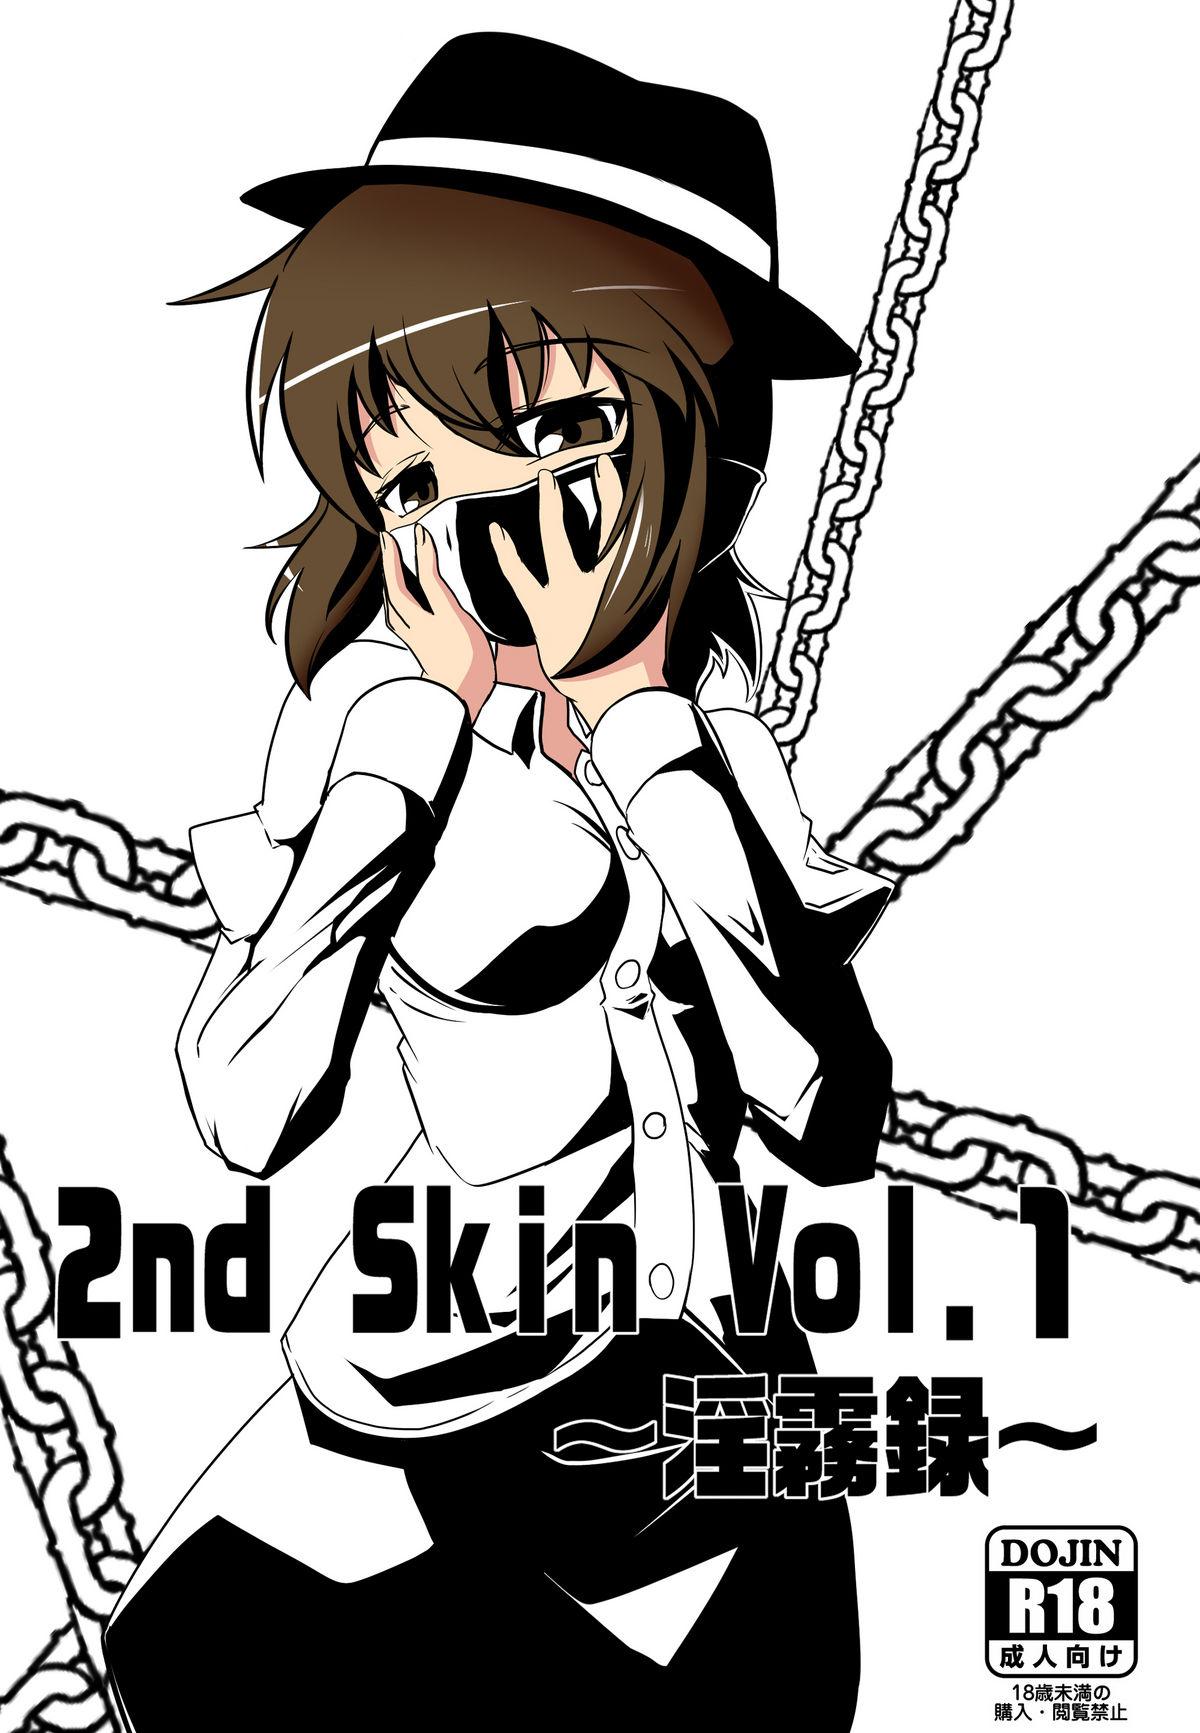 Bedroom 2nd Skin Vol. 1 - Touhou project Hairy - Picture 1